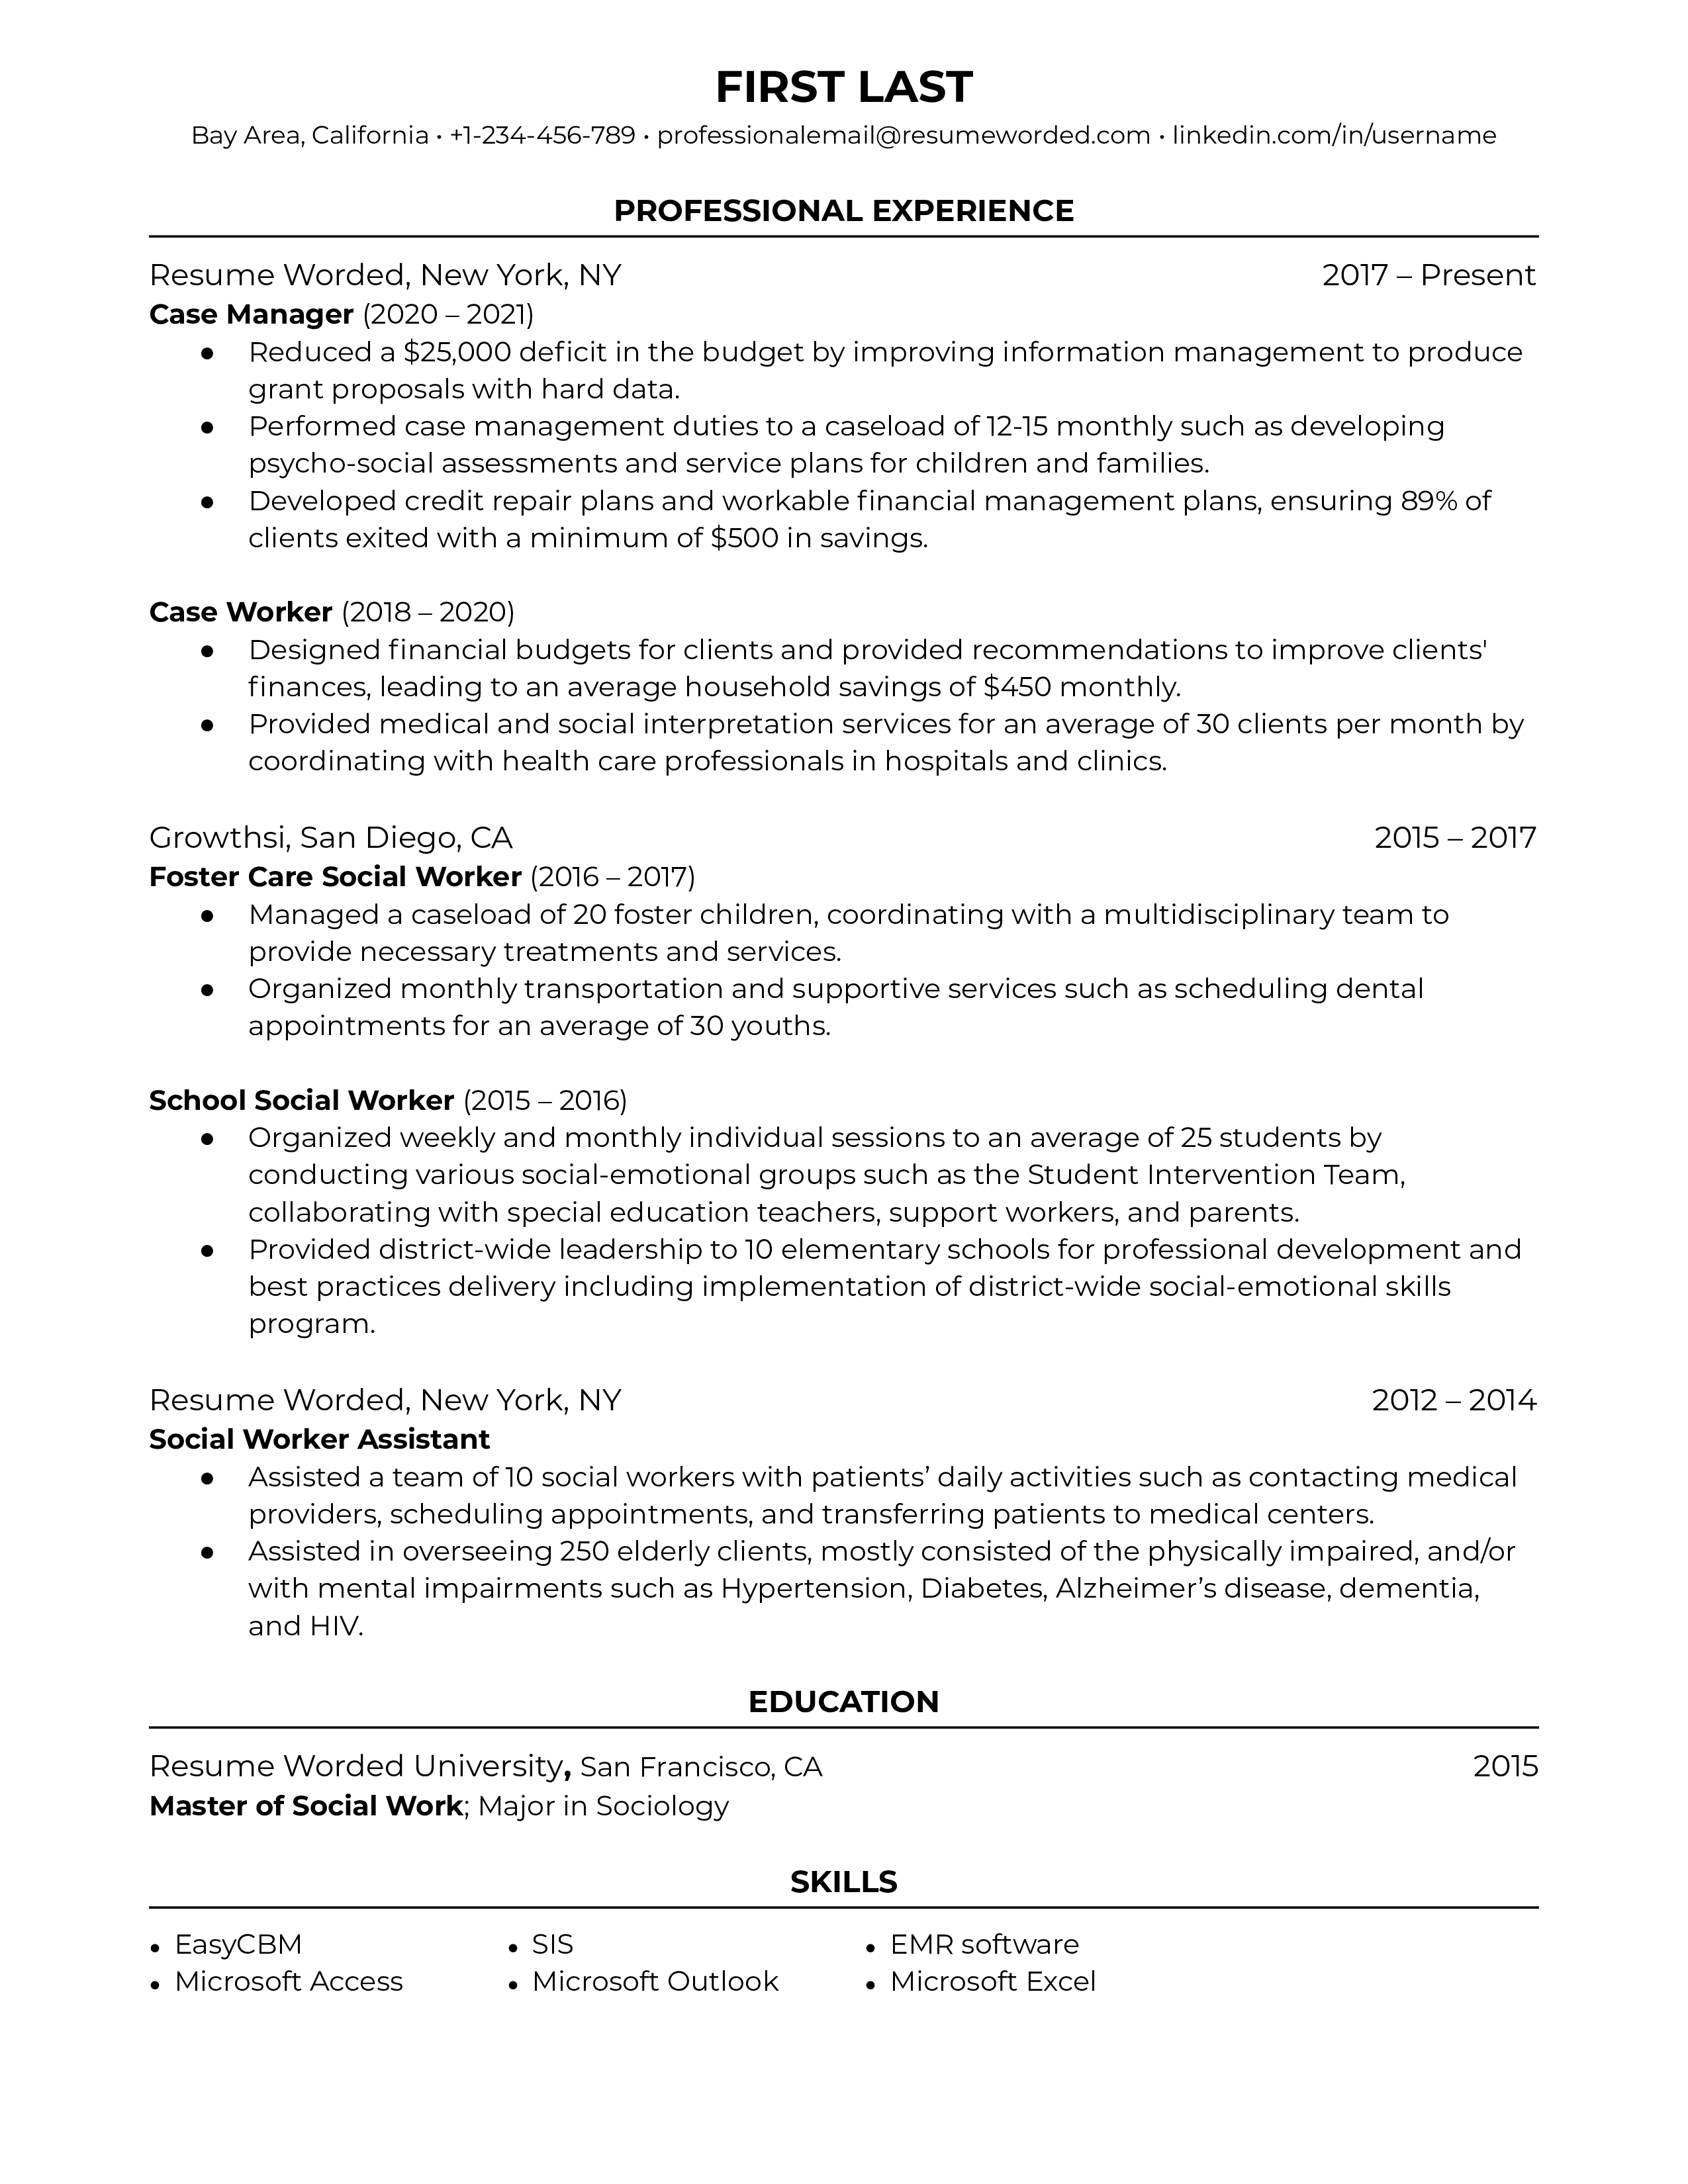 Screenshot of a CV emphasizing digital competence and crisis management skills for a Case Manager role.